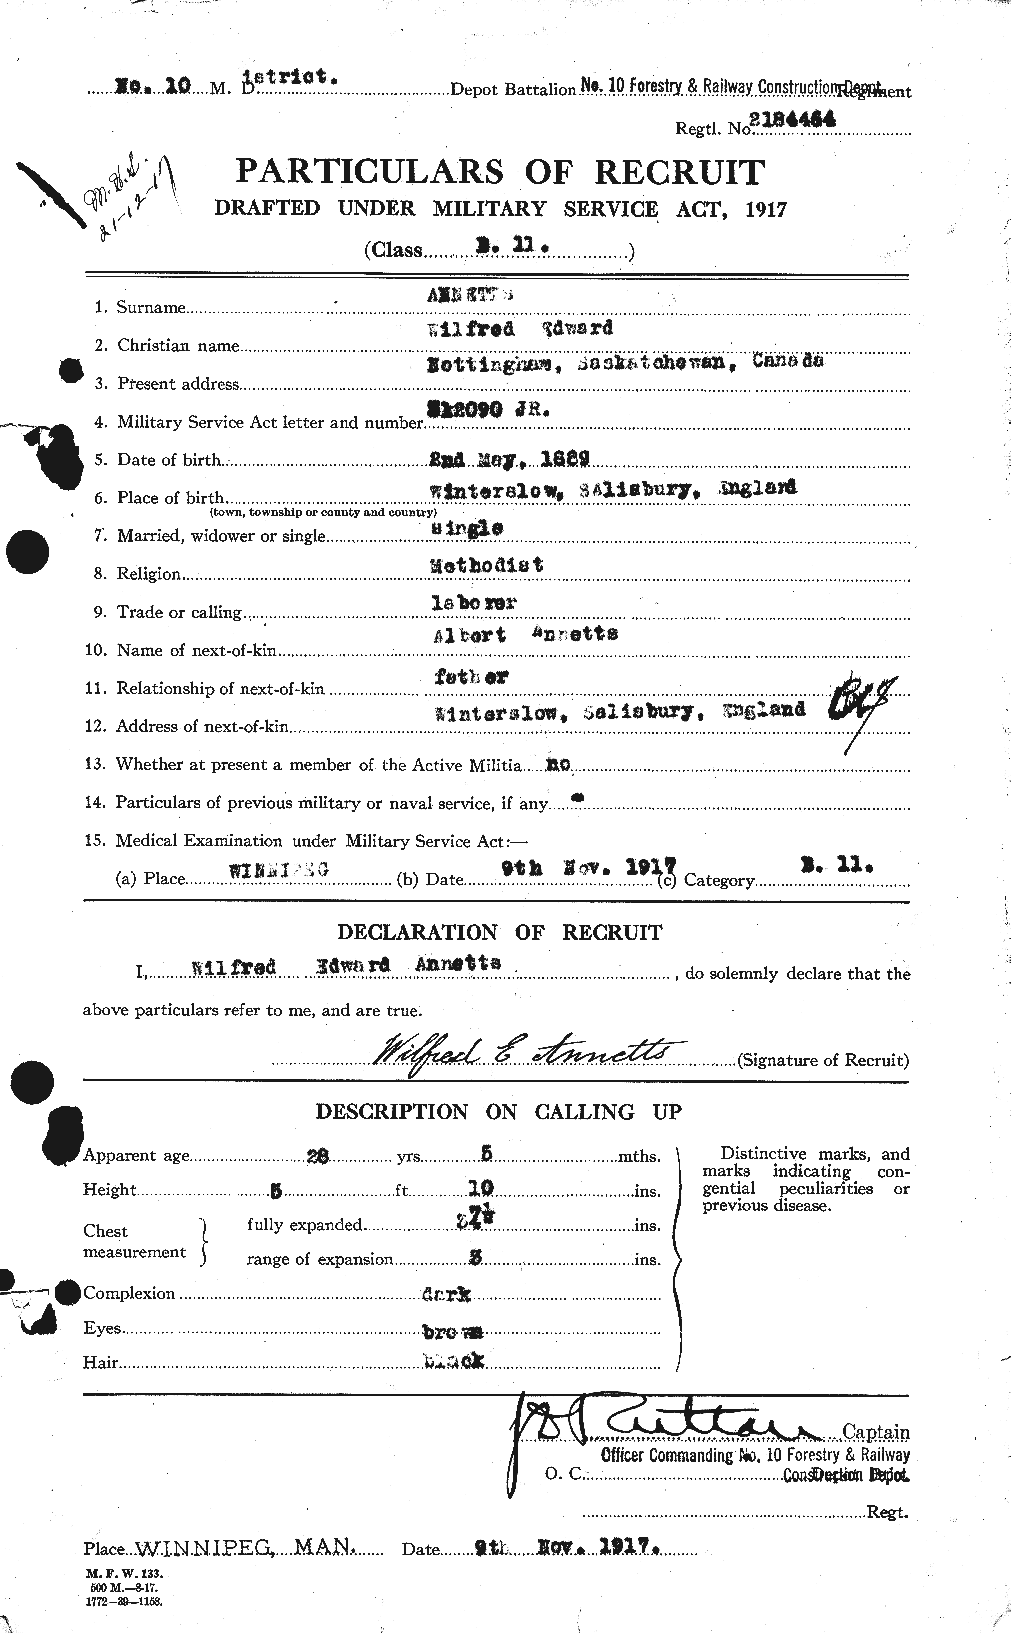 Personnel Records of the First World War - CEF 212435a